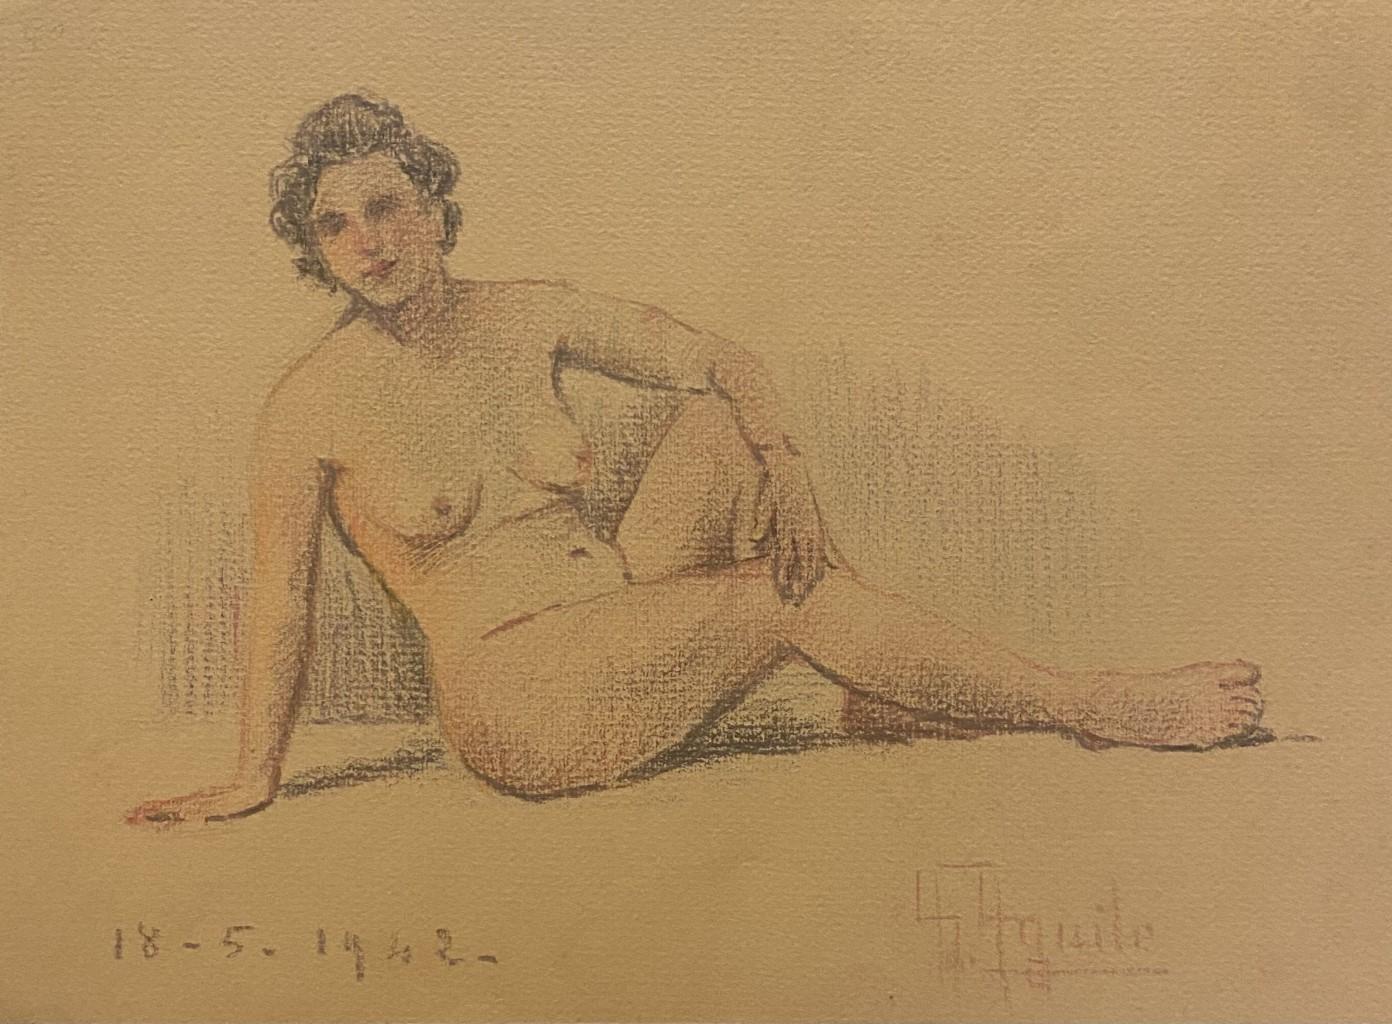 Nude of Woman - Original Pencil and Pastels Drawing - Mid-20th Century